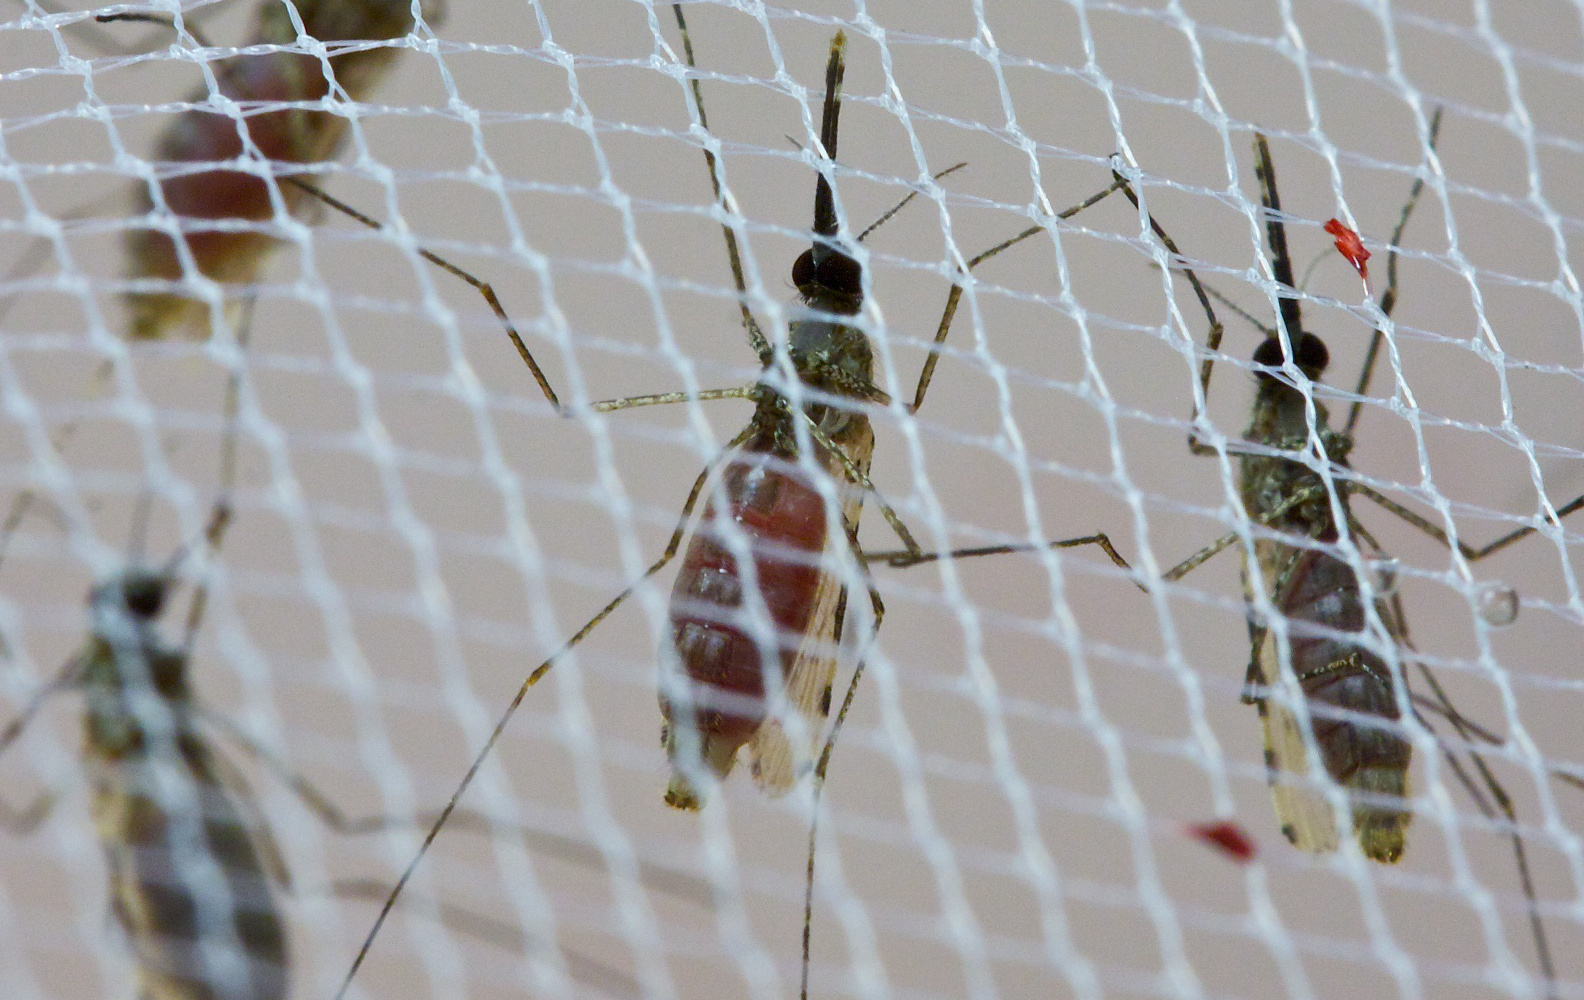 four mosquitos on the underside of a net